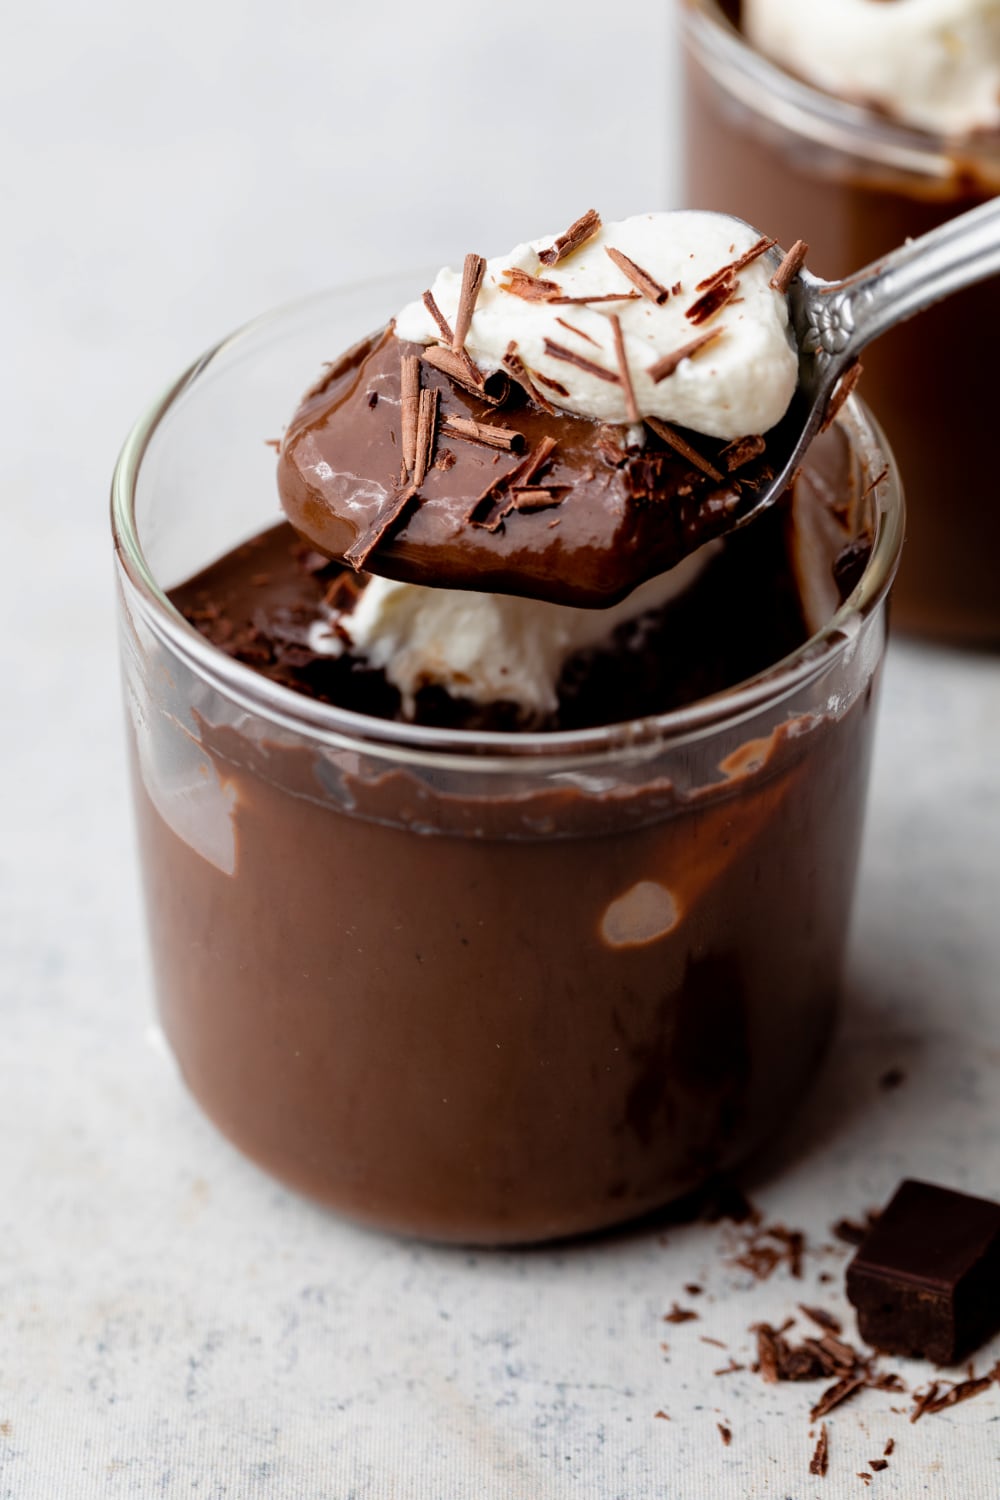 spoonful of dairy free chocolate pudding with vegan whipped cream.